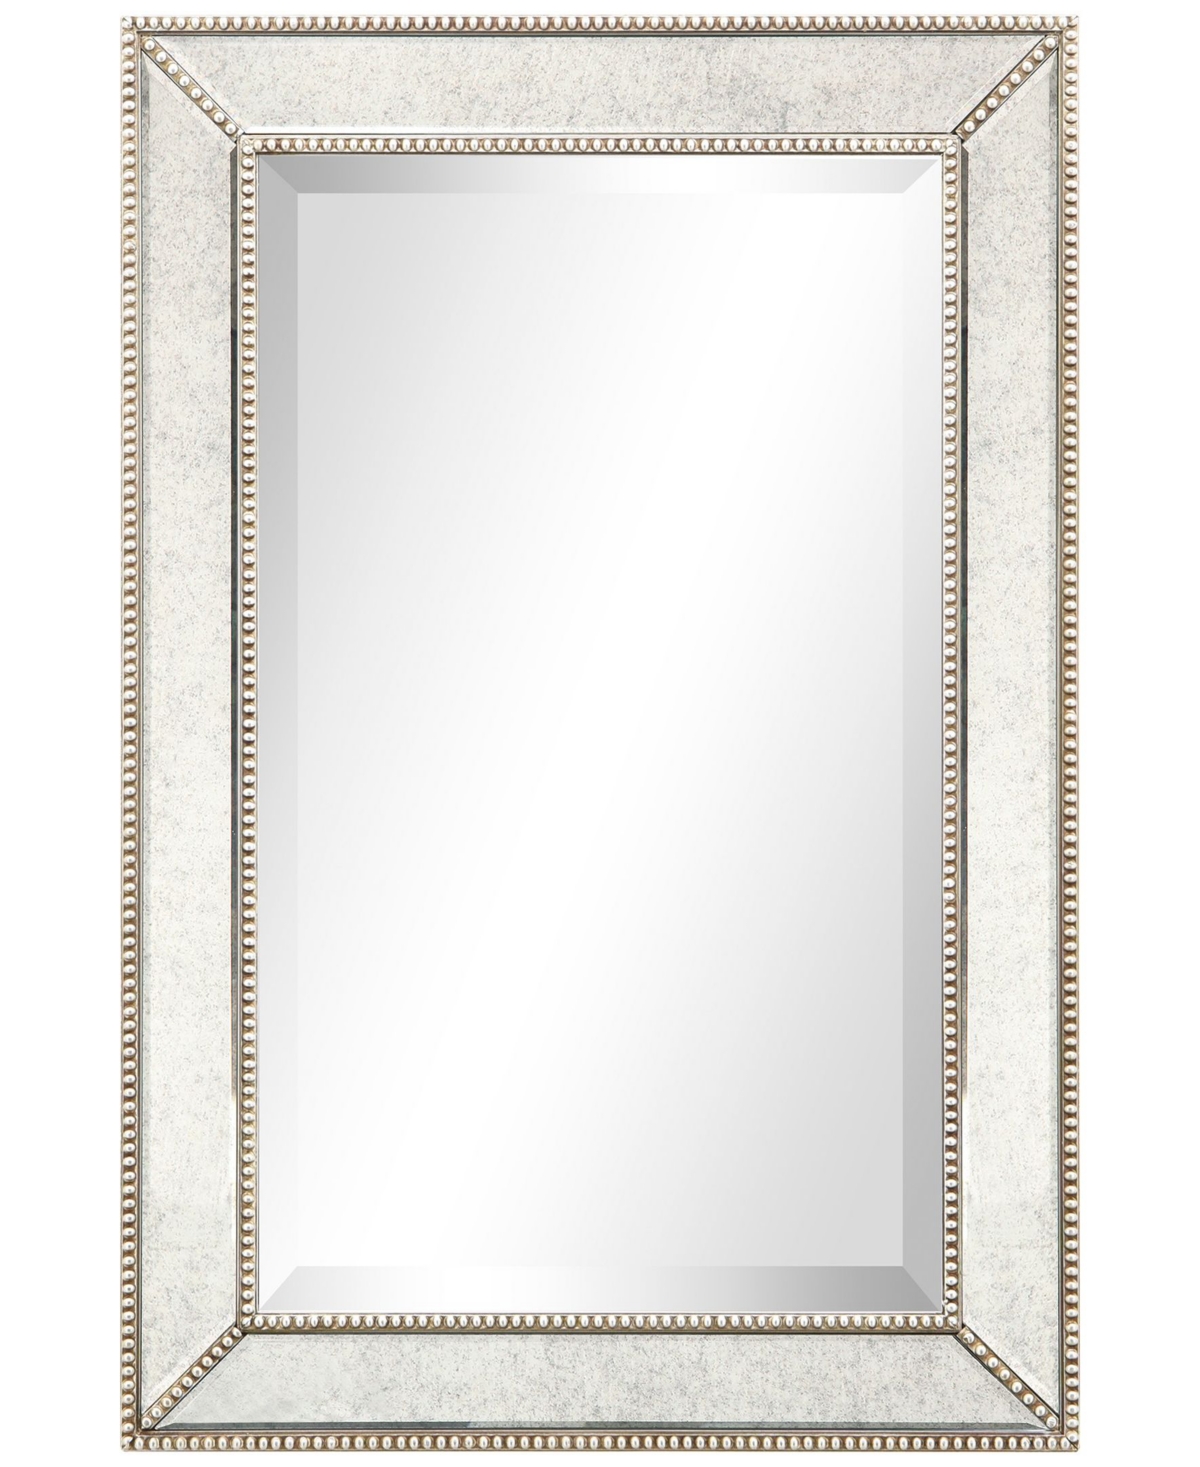 Solid Wood Frame Covered with Beveled Antique Mirror Panels - 20" x 30" - Champagne